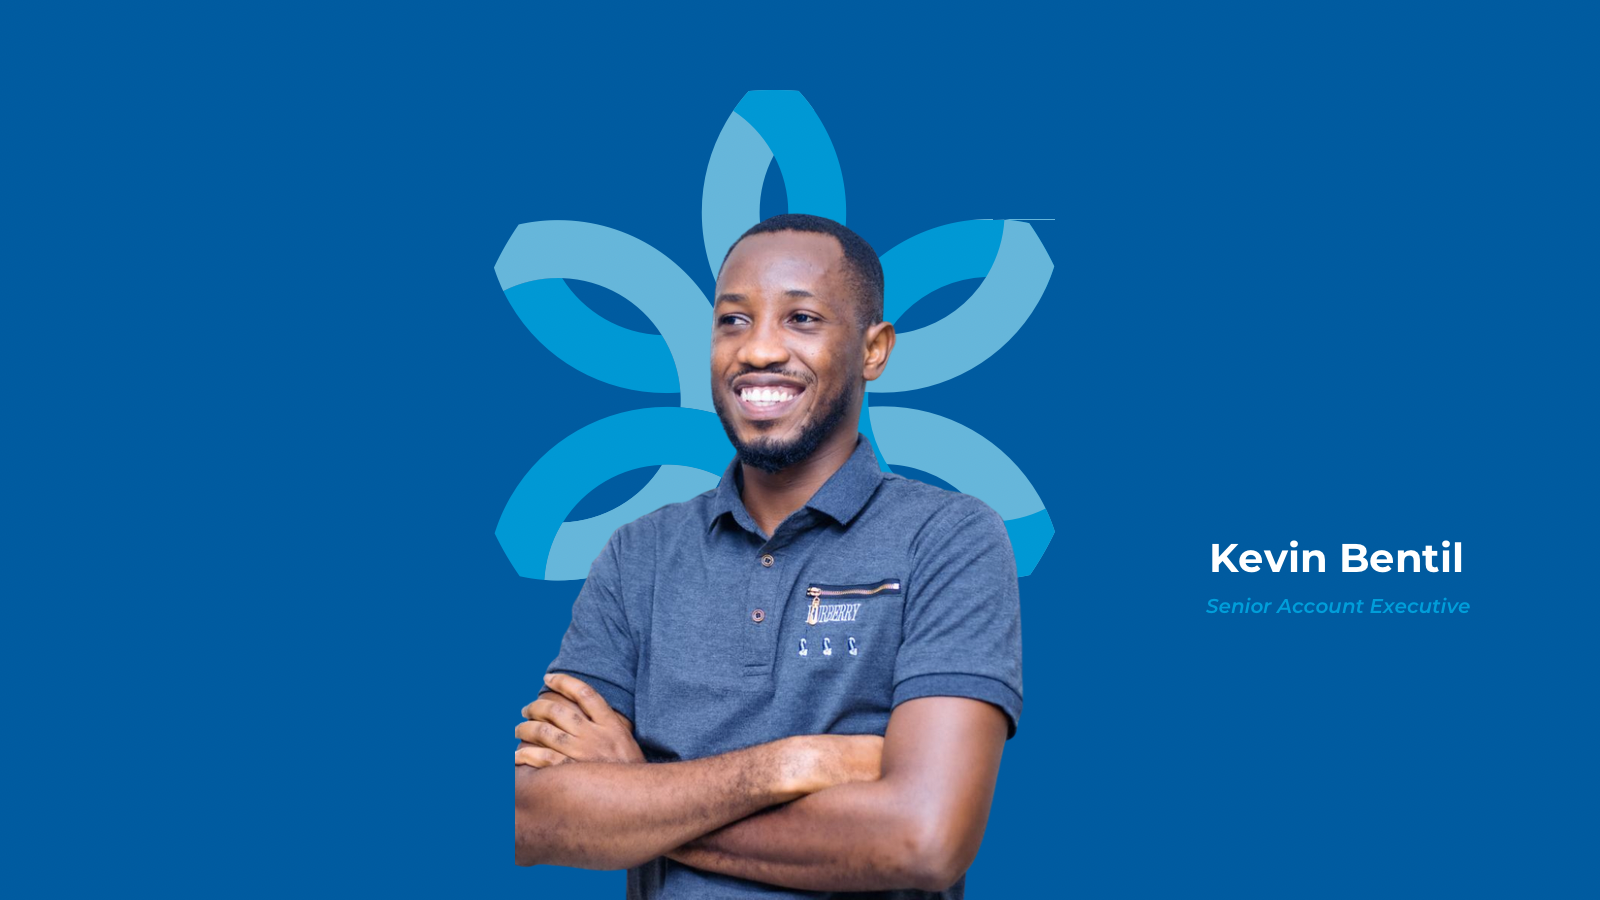 Meet Kevin Bentil, the Account Executive Helping Transform Ghana’s Payment Landscape